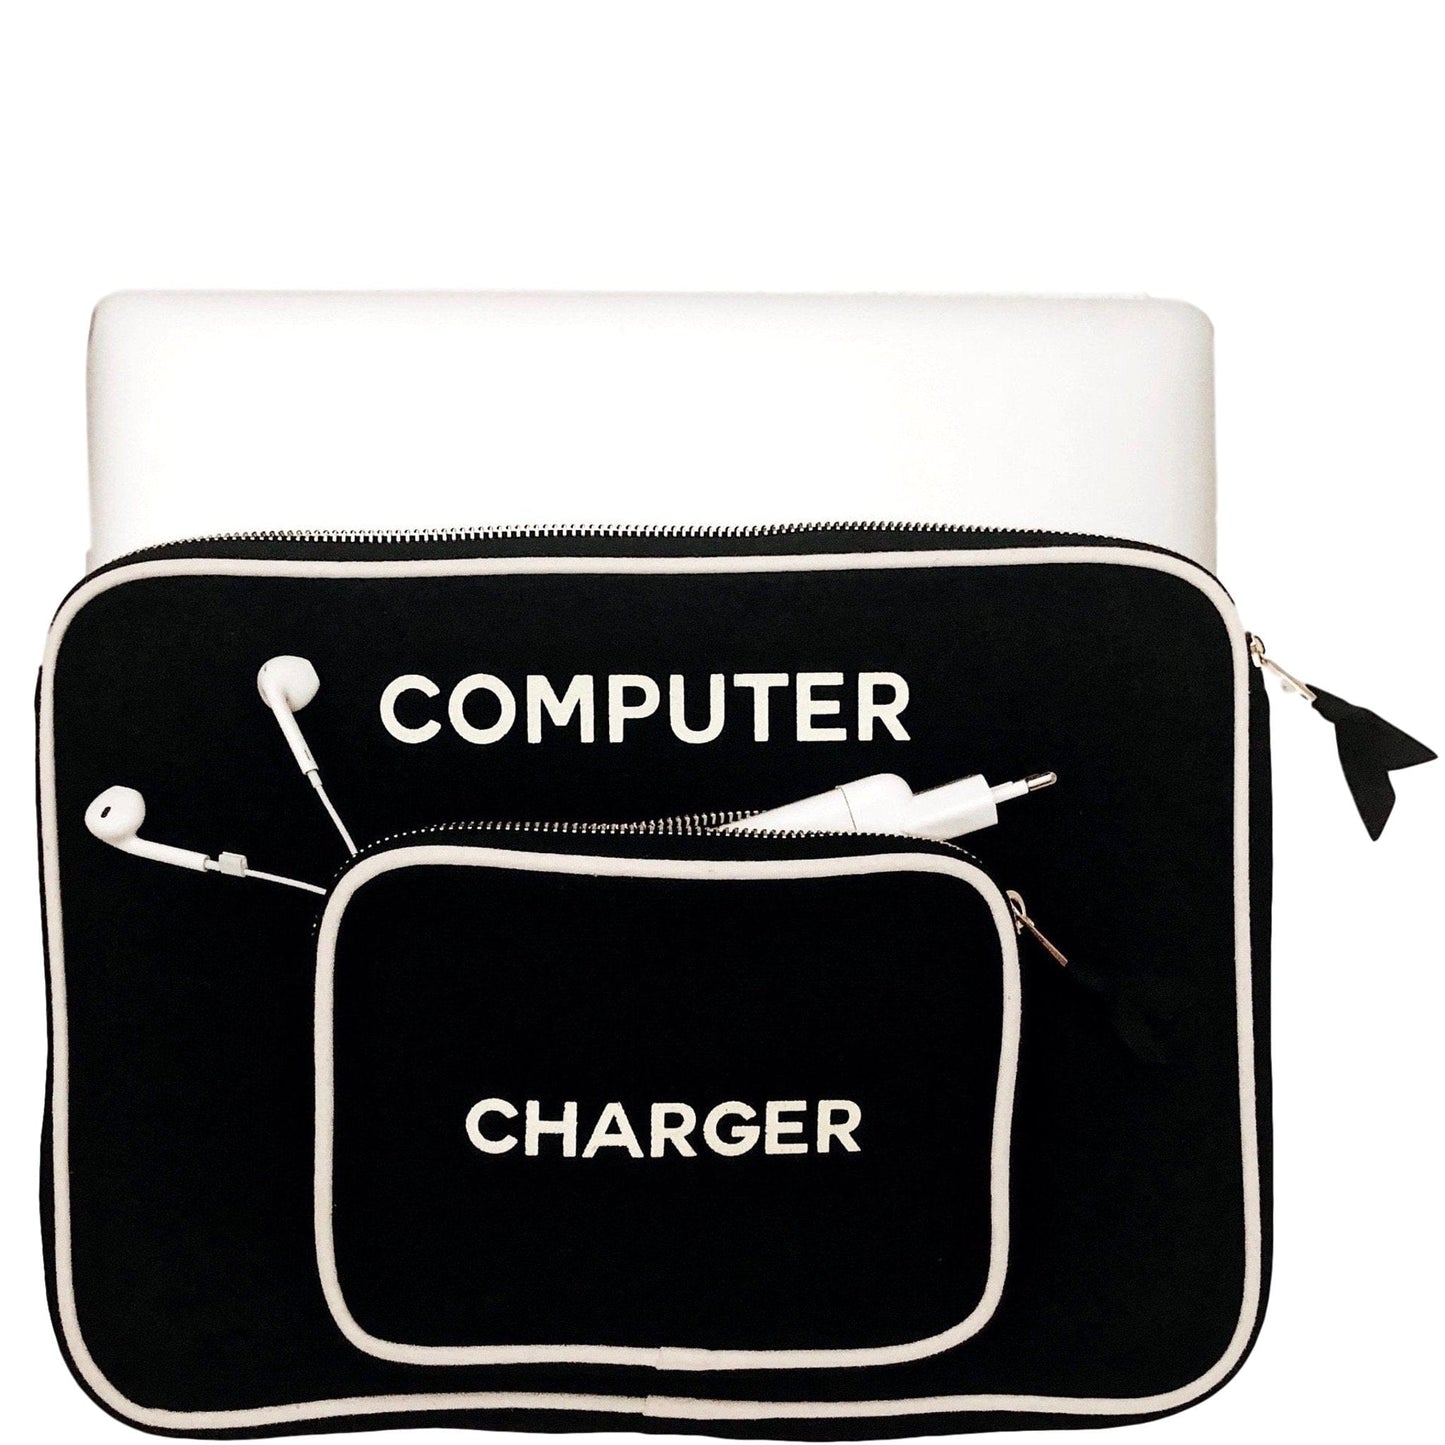 Laptop Sleeve Case with Charger Pocket Large, Personalized, Black